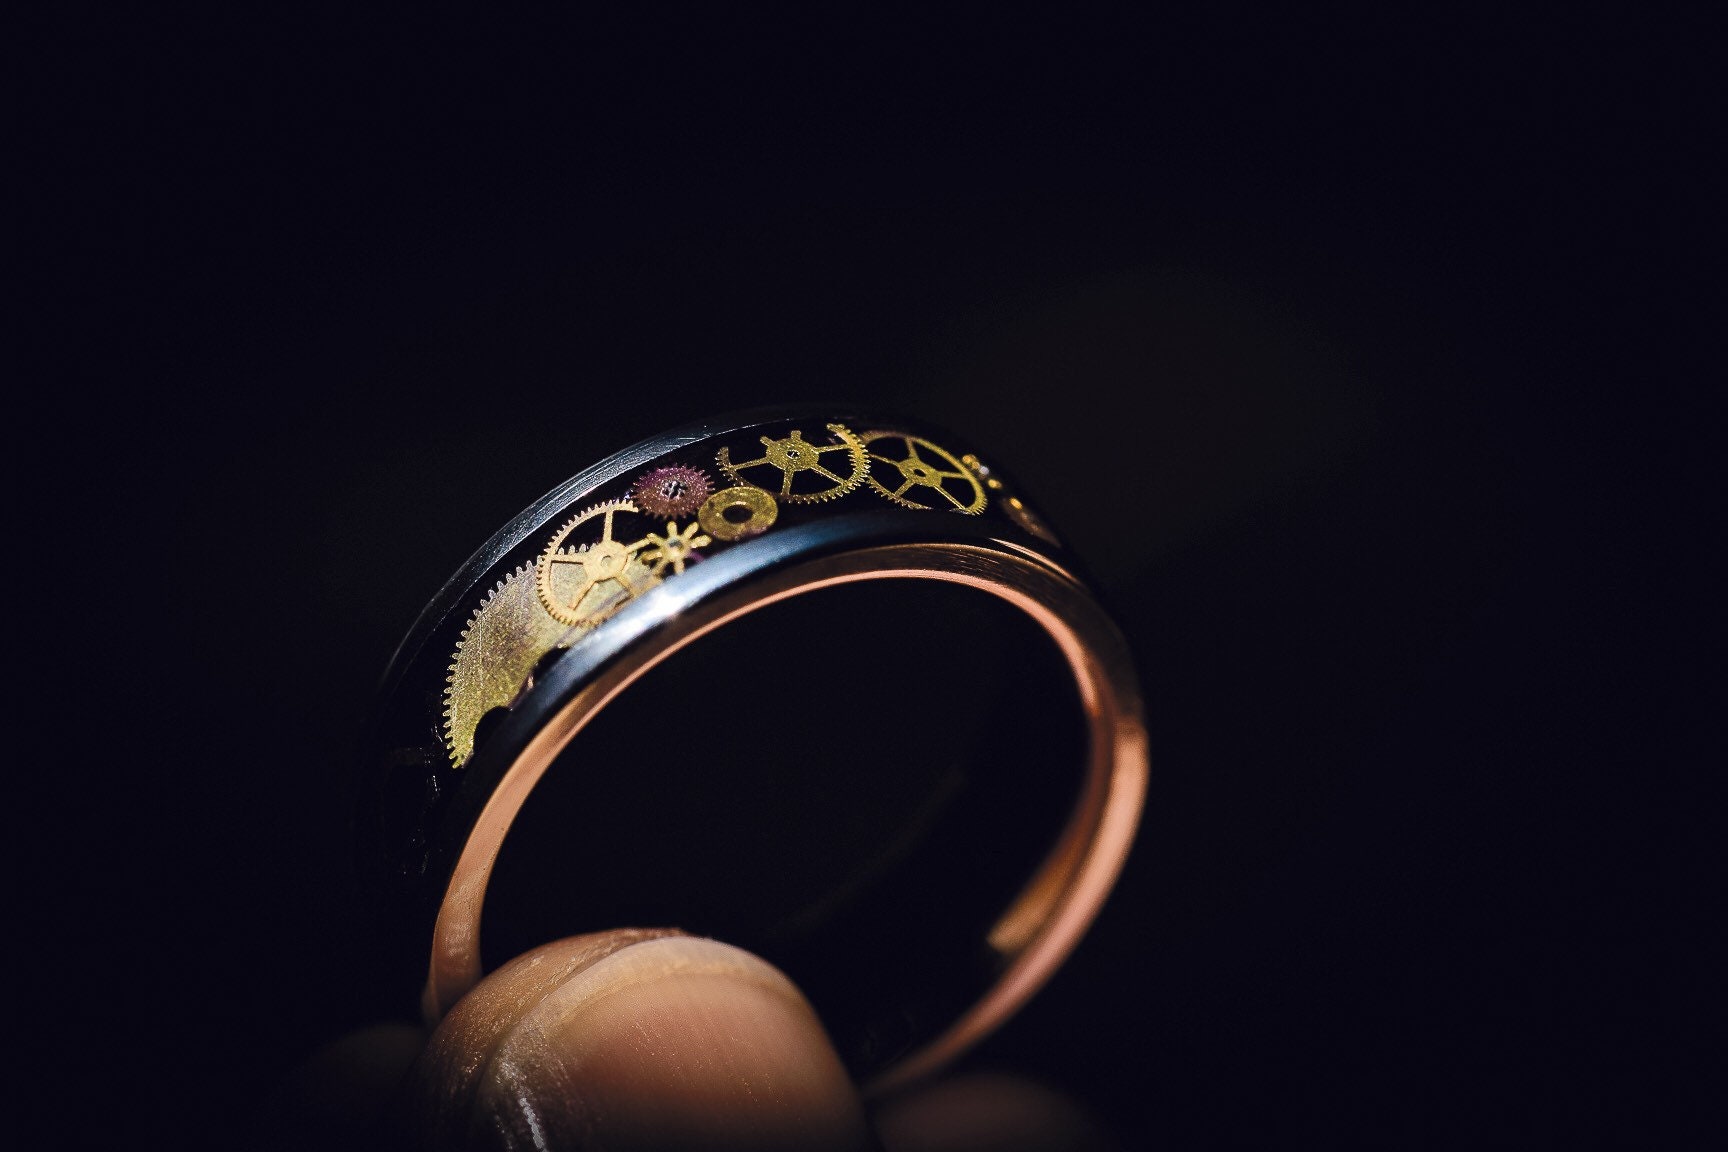 Steampunk Men's Wedding Band Made of Solid Titanium and Brass